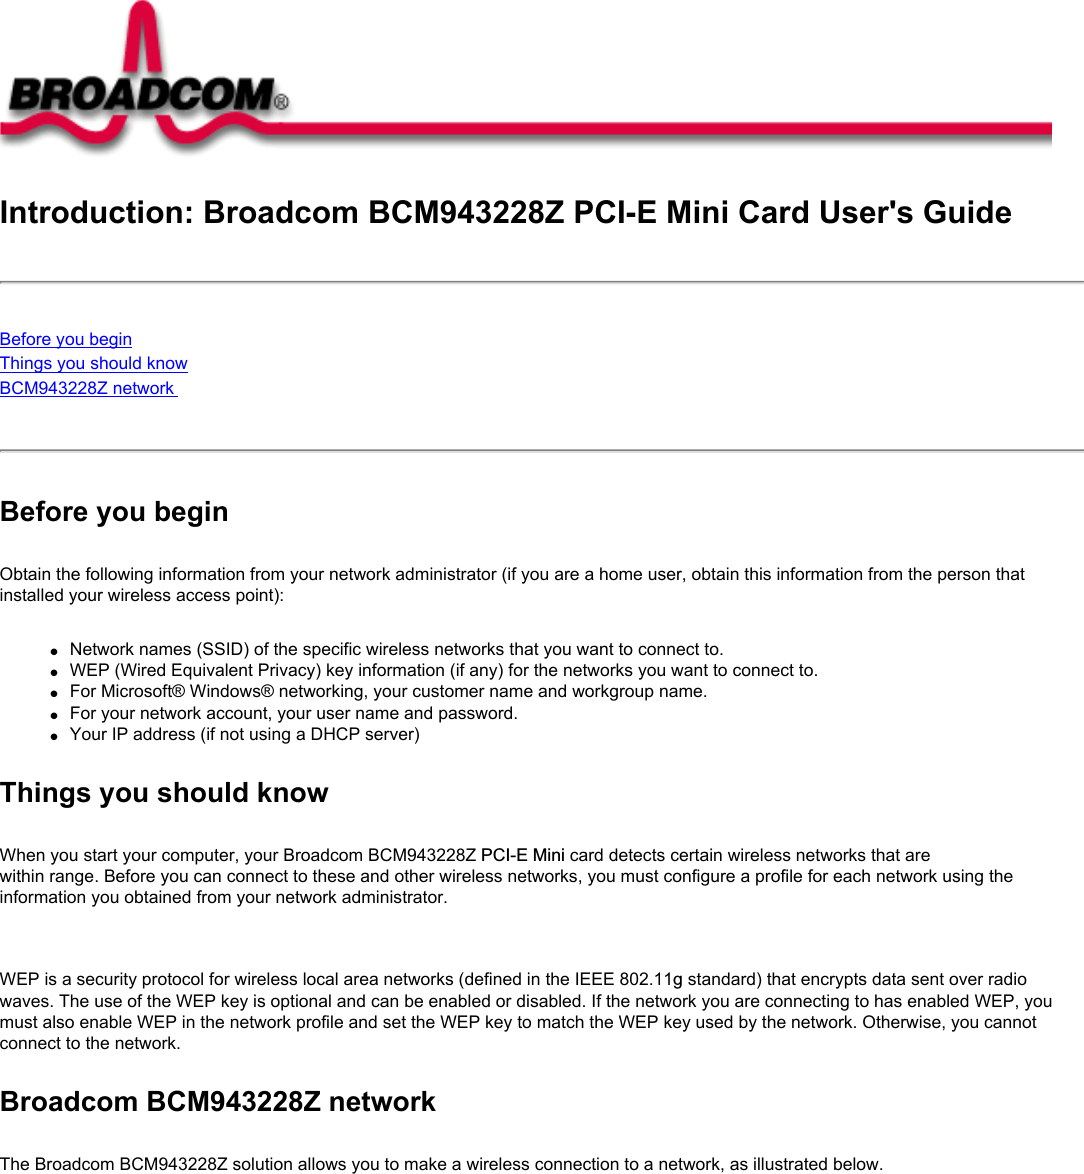 Introduction: Broadcom BCM943228Z PCI-E Mini Card User&apos;s GuideBefore you beginThings you should knowBCM943228Z network Before you beginObtain the following information from your network administrator (if you are a home user, obtain this information from the person that installed your wireless access point):●     Network names (SSID) of the specific wireless networks that you want to connect to.●     WEP (Wired Equivalent Privacy) key information (if any) for the networks you want to connect to.●     For Microsoft® Windows® networking, your customer name and workgroup name.●     For your network account, your user name and password.●     Your IP address (if not using a DHCP server)Things you should knowWhen you start your computer, your Broadcom BCM943228Z PCI-E Mini card detects certain wireless networks that are within range. Before you can connect to these and other wireless networks, you must configure a profile for each network using the information you obtained from your network administrator.   WEP is a security protocol for wireless local area networks (defined in the IEEE 802.11g standard) that encrypts data sent over radio waves. The use of the WEP key is optional and can be enabled or disabled. If the network you are connecting to has enabled WEP, you must also enable WEP in the network profile and set the WEP key to match the WEP key used by the network. Otherwise, you cannot connect to the network.Broadcom BCM943228Z networkThe Broadcom BCM943228Z solution allows you to make a wireless connection to a network, as illustrated below.